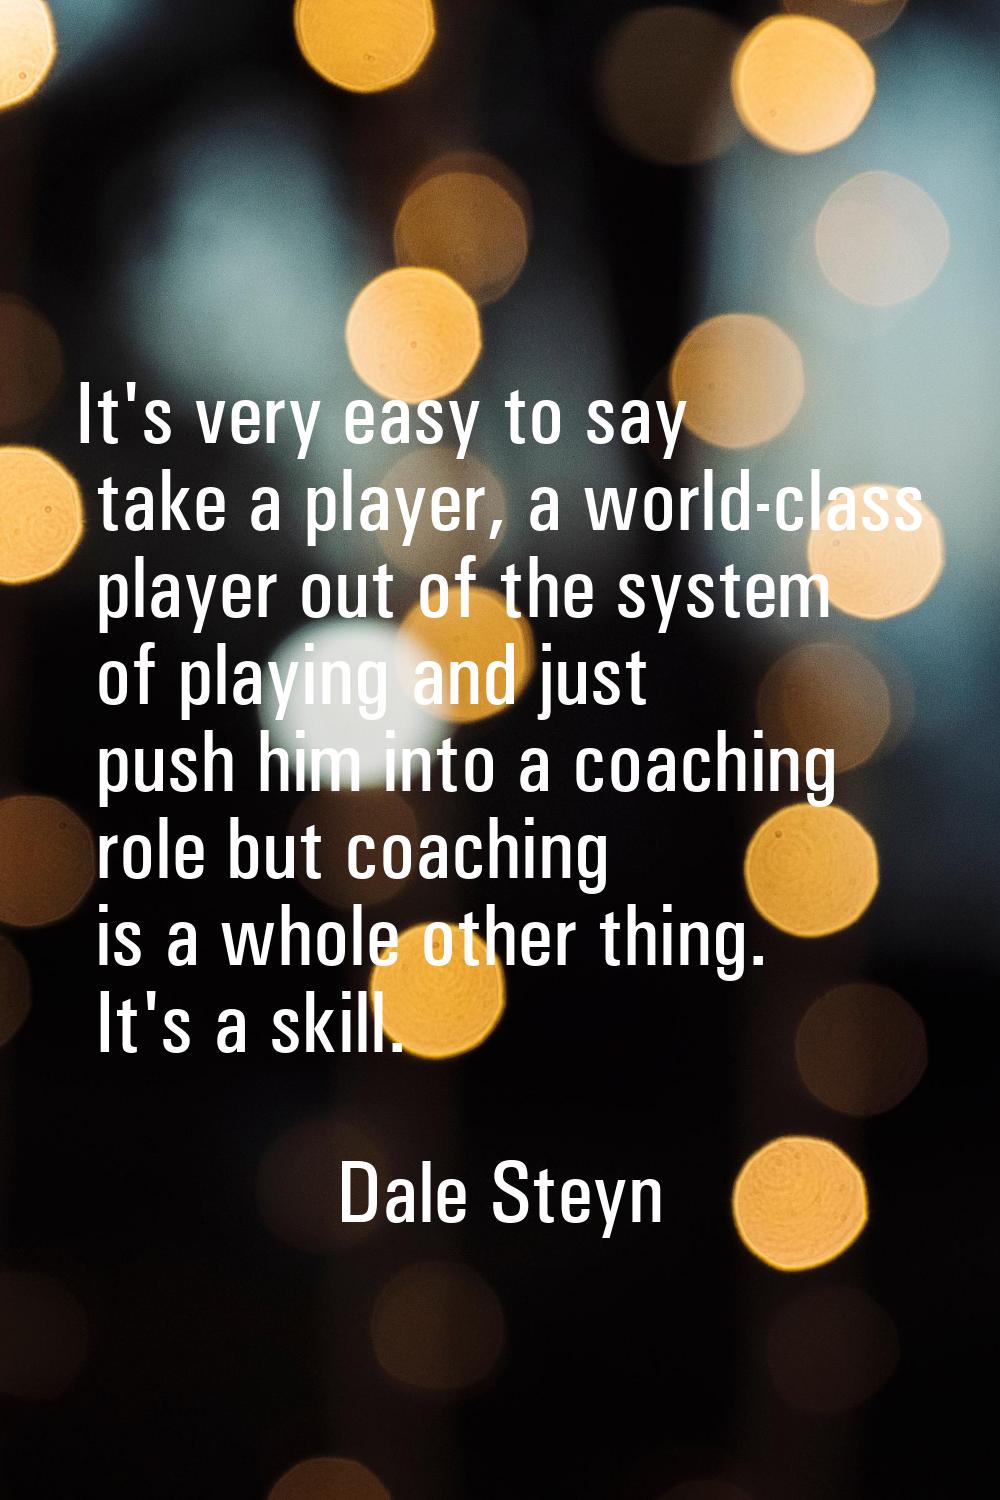 It's very easy to say take a player, a world-class player out of the system of playing and just pus